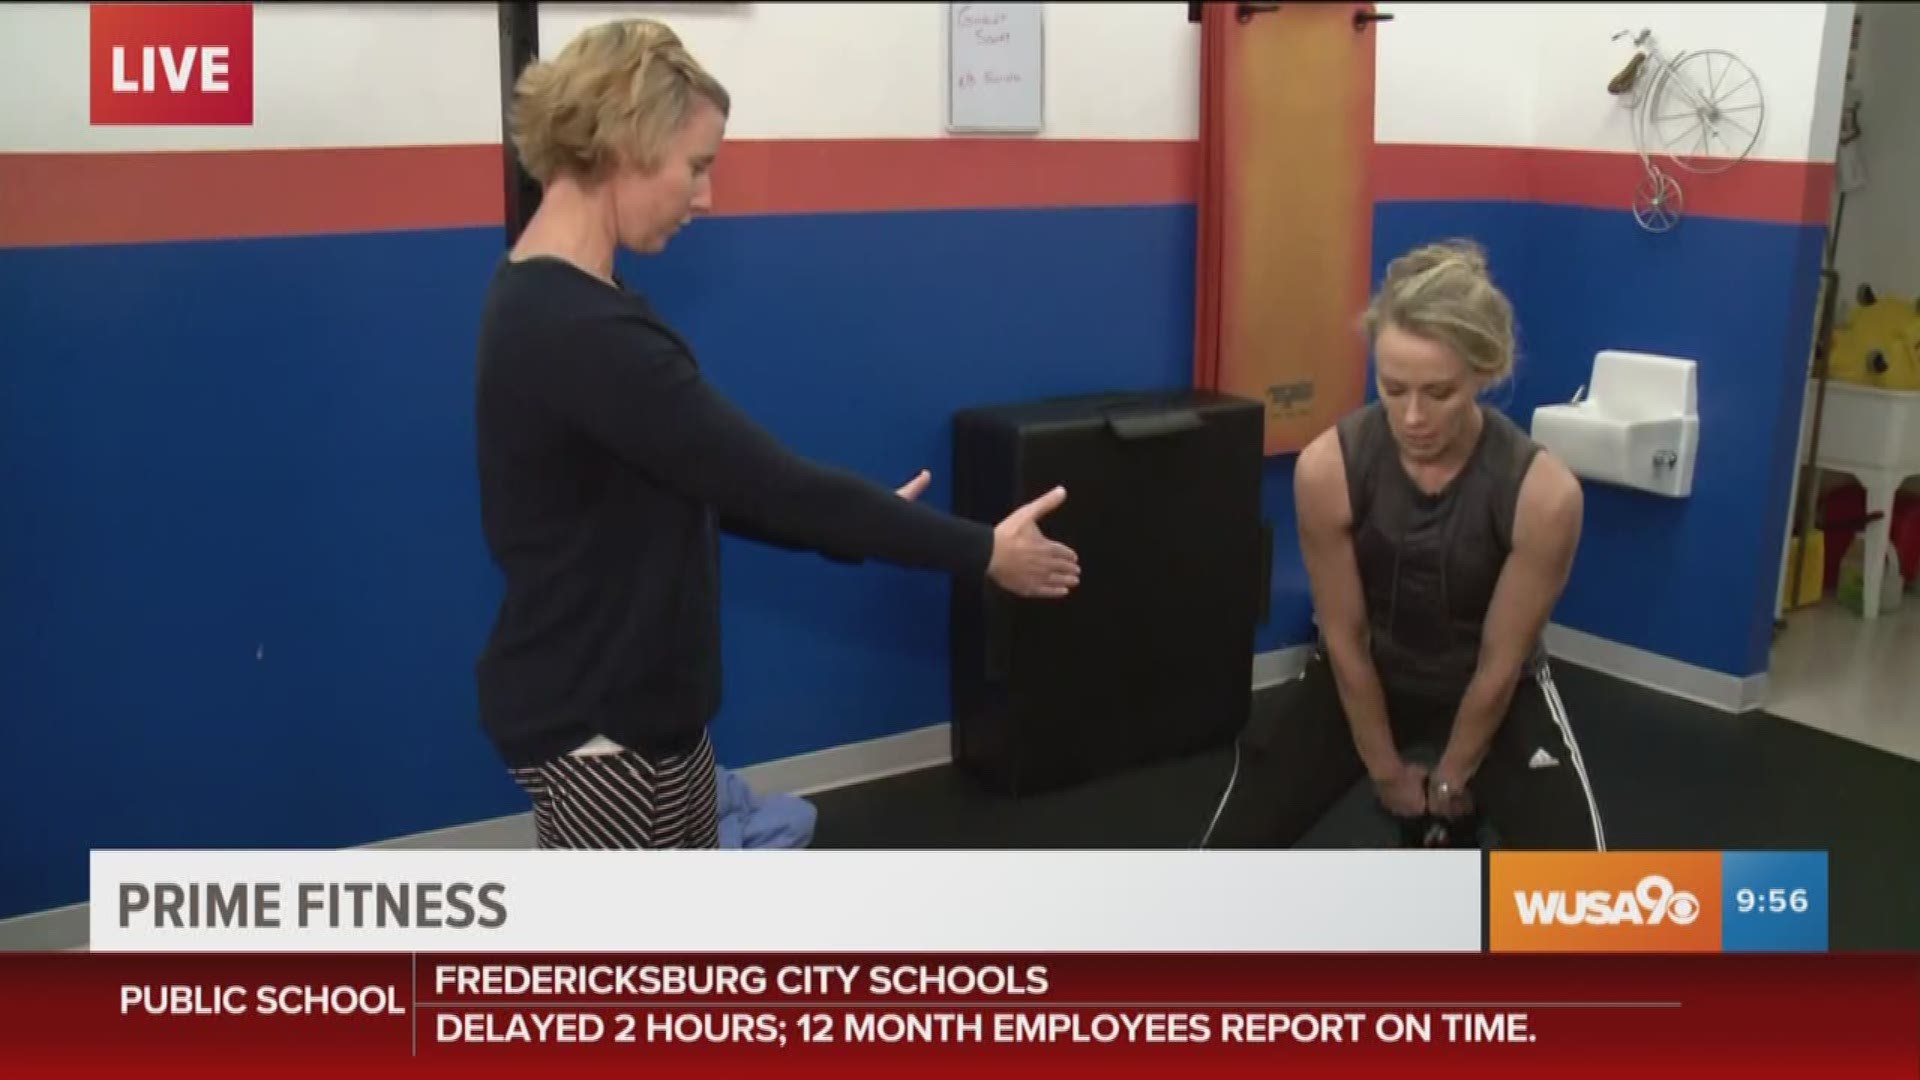 Don’t forget to work on your hips when working out. Christy Giroux, co-owner and fitness coach at Prime Fitness has some tips.